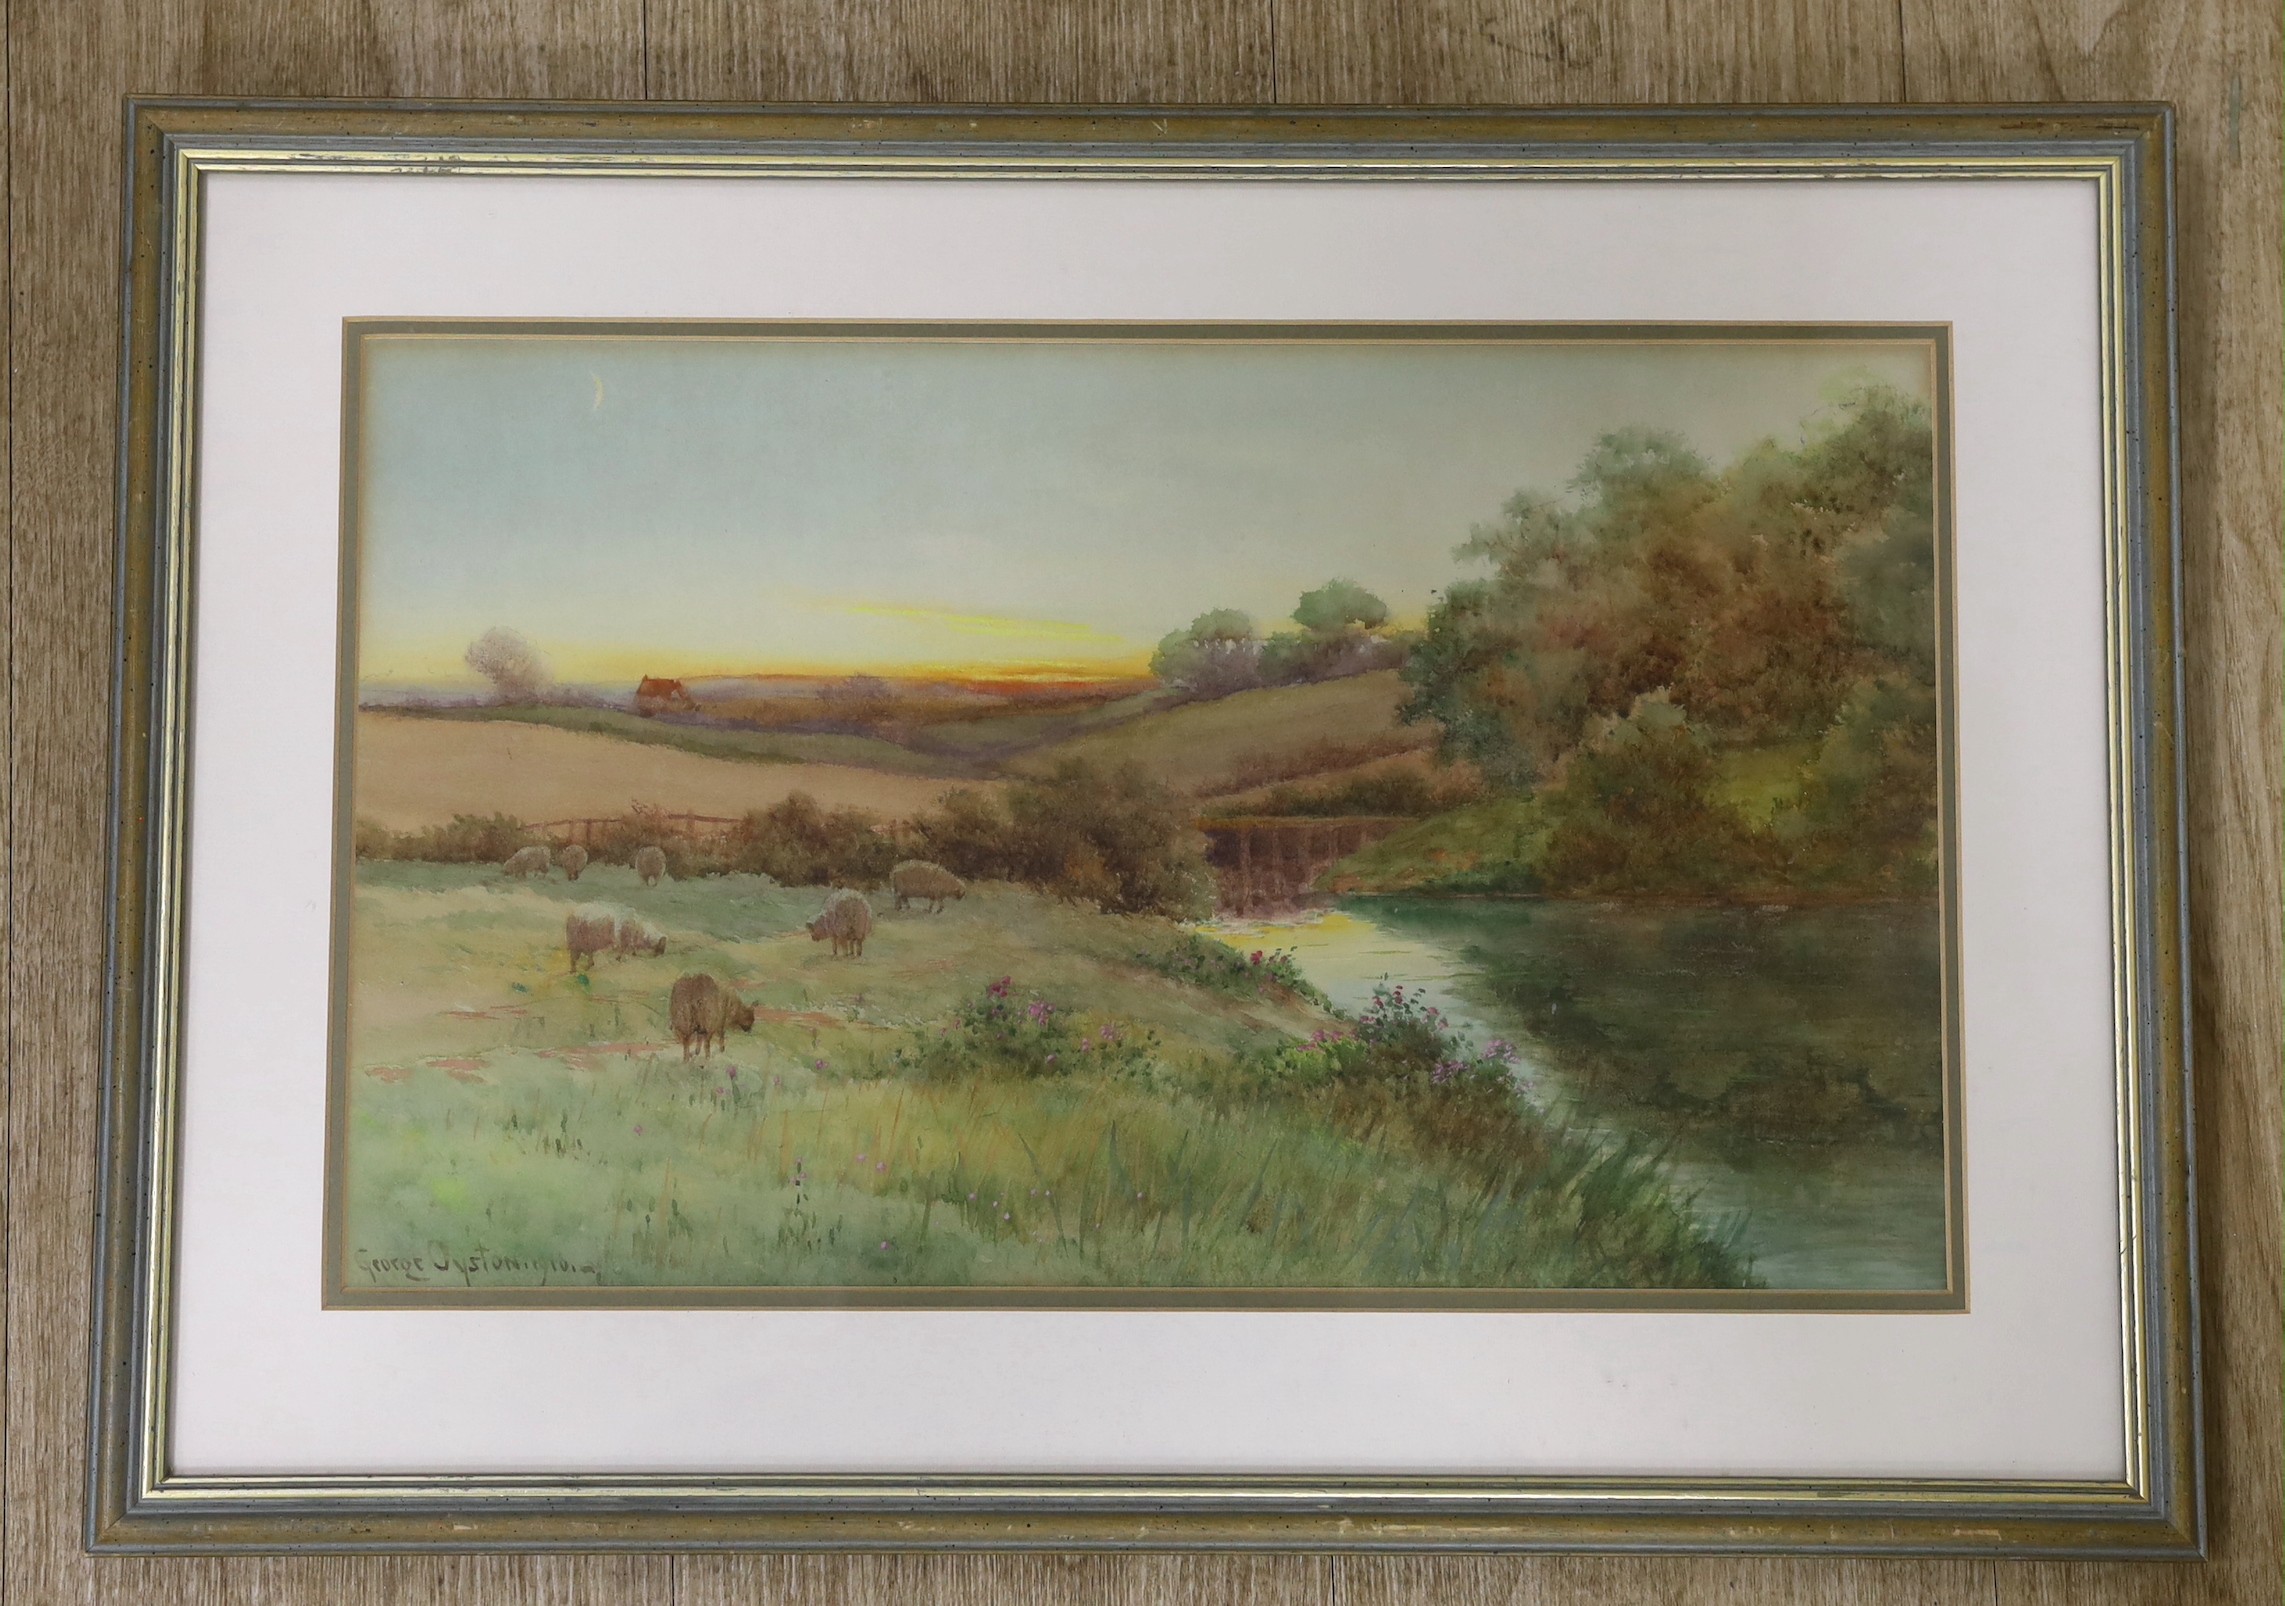 George Oyston (1861-1937), watercolour, Sheep in a meadow at sunset, signed and dated 1910, 26 x 44cm